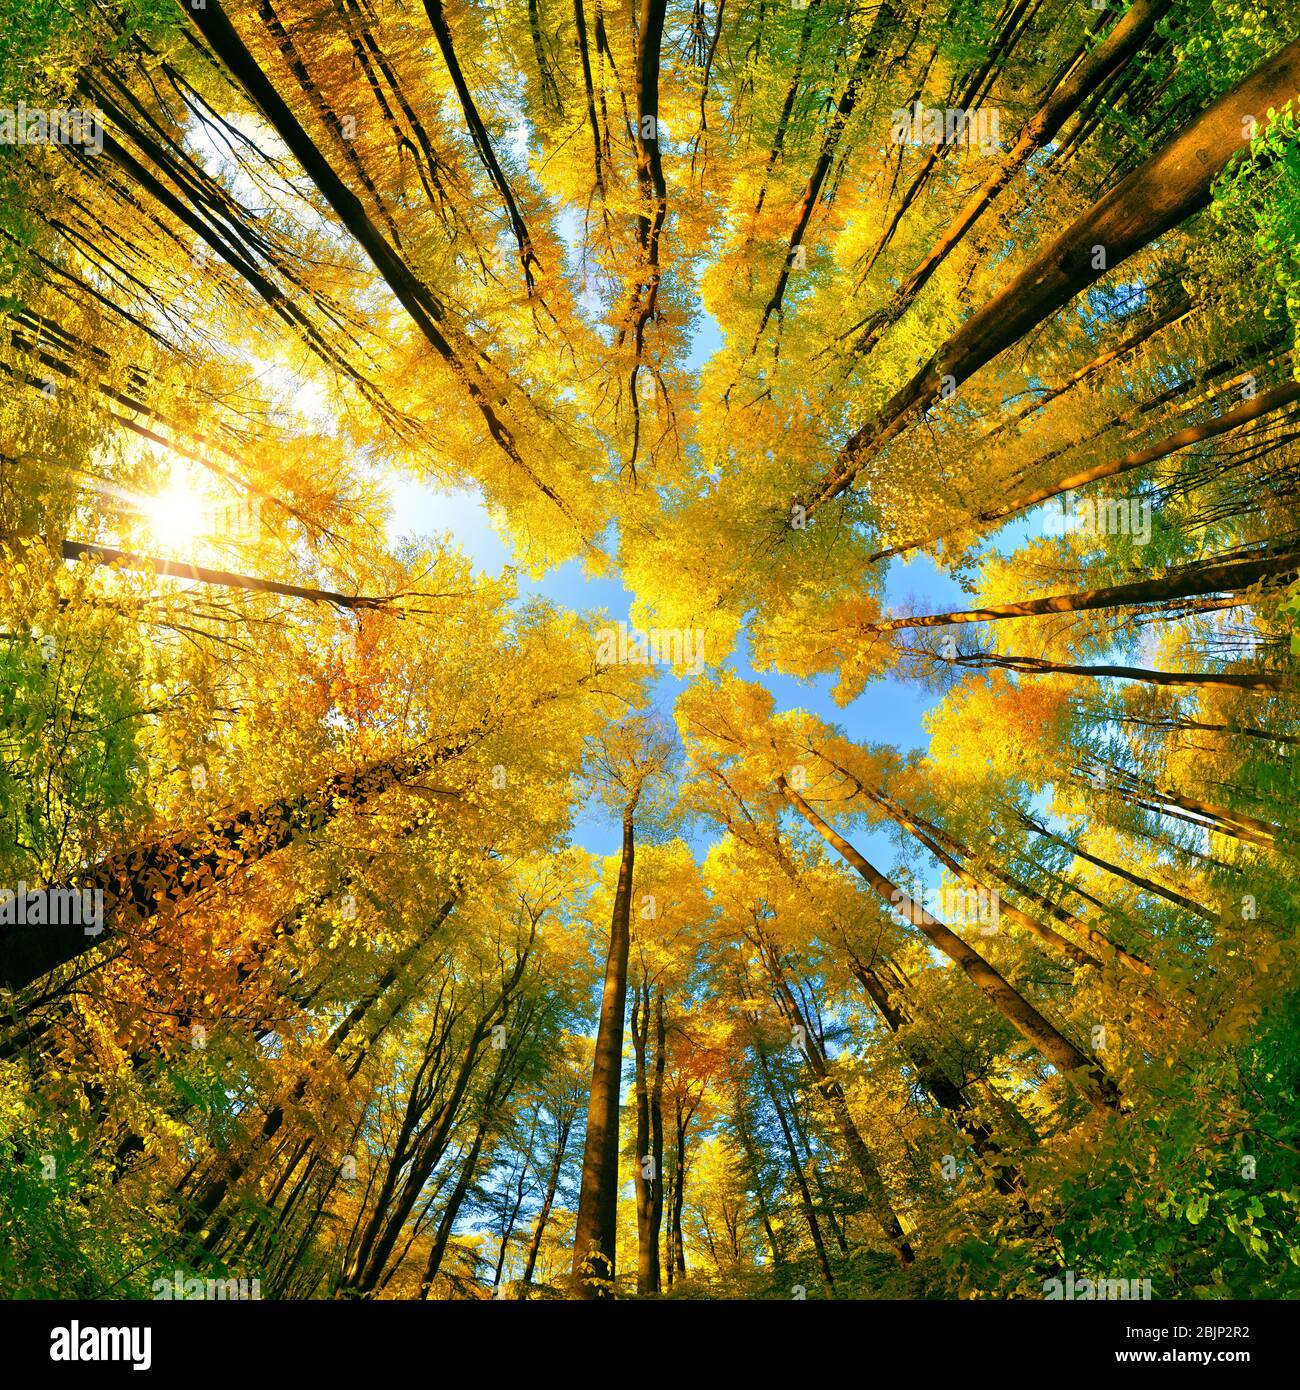 Extreme wide angle upwards shot in a forest, magnificent view to the colorful canopy with autumn foliage colors and blue sky, square format Stock Photo